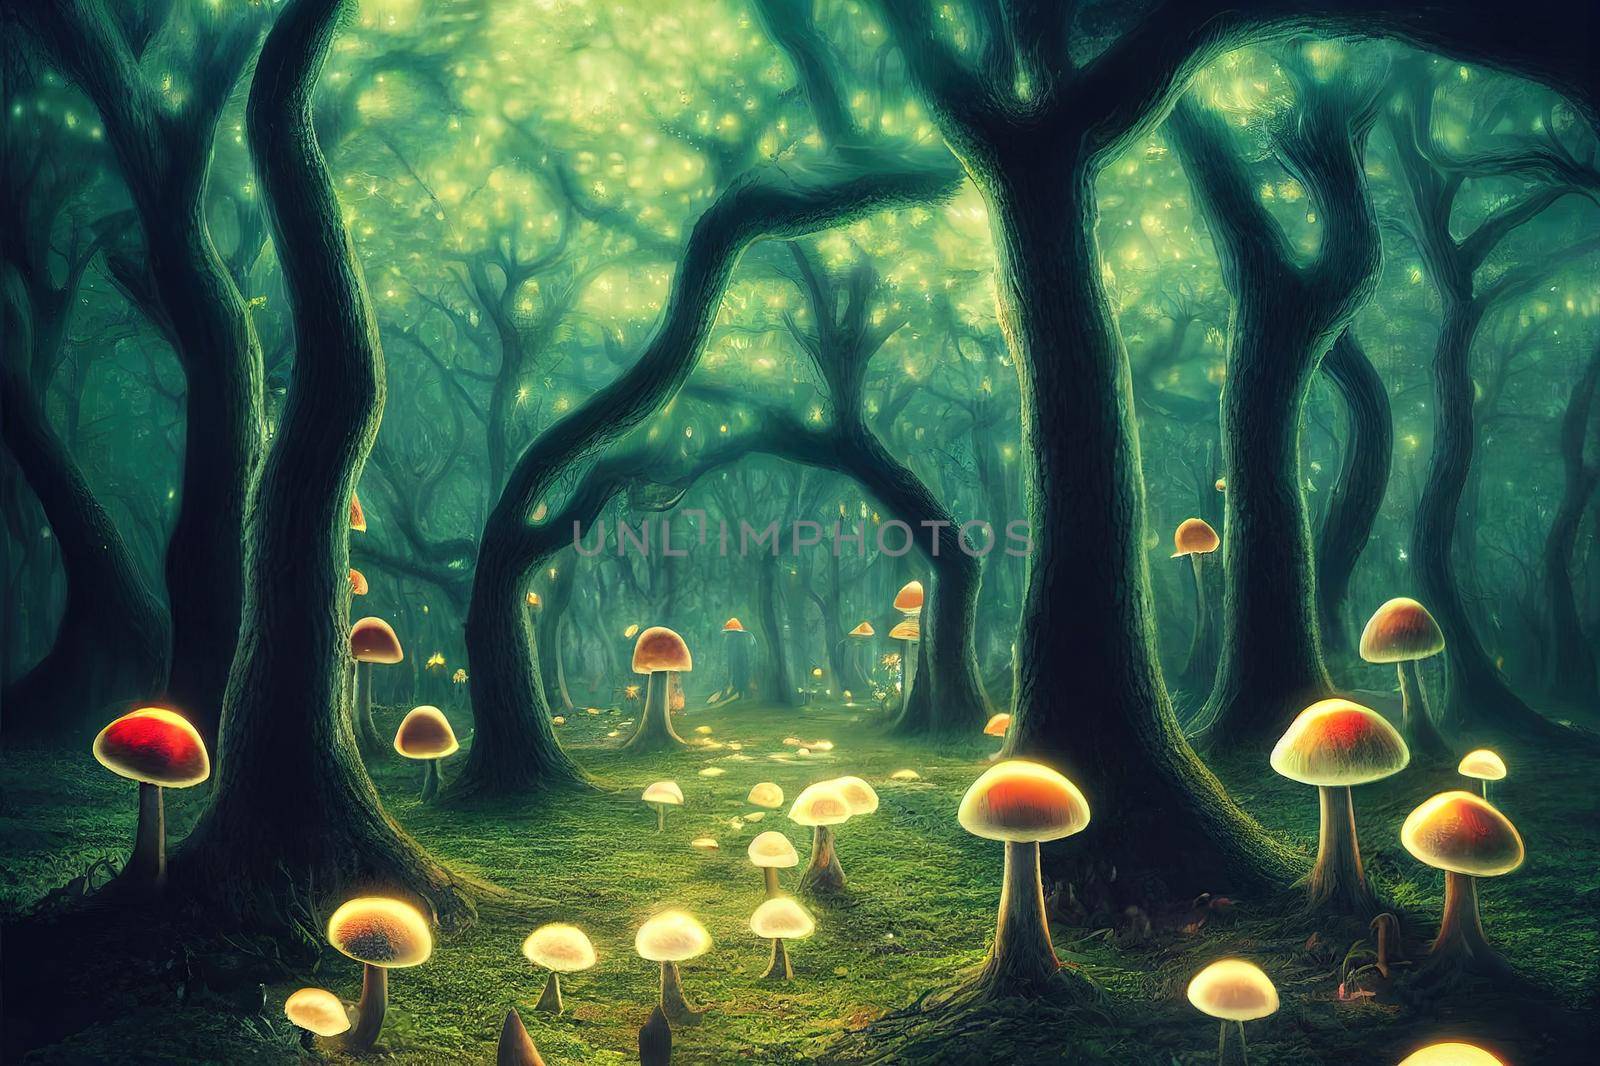 an enchanted forest at night illuminated by glowing mushrooms, by 2ragon